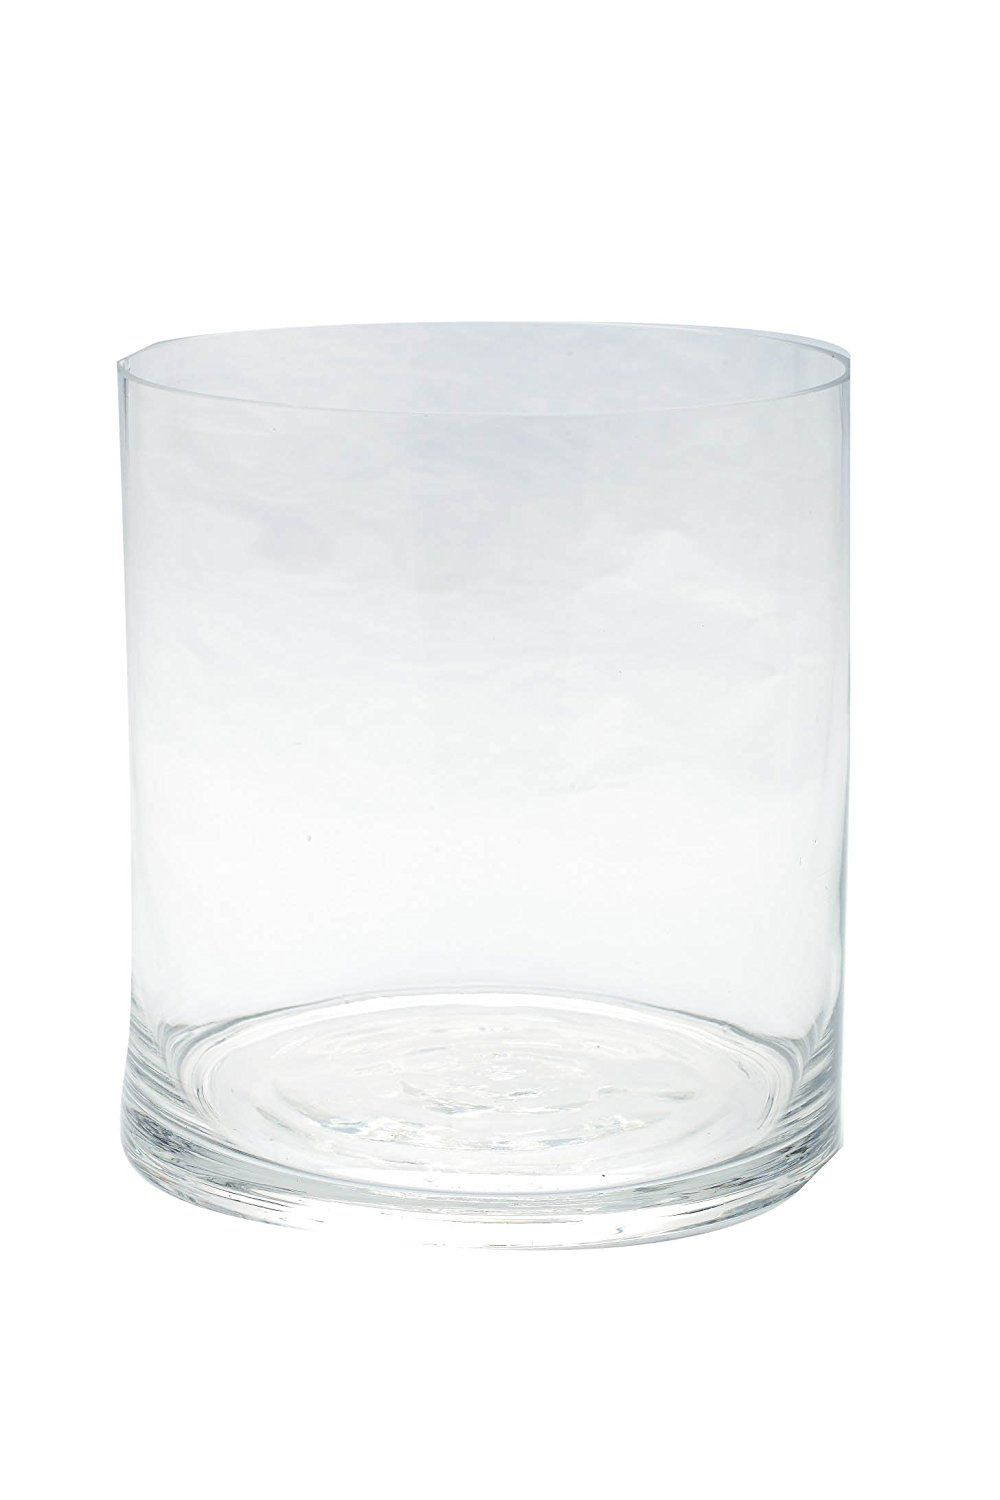 20 Trendy 12 Inch Clear Cylinder Vase 2022 free download 12 inch clear cylinder vase of diamond star glass 84010c clear cylinder 9 by 10 want for diamond star glass 84010c clear cylinder 9 by 10 want